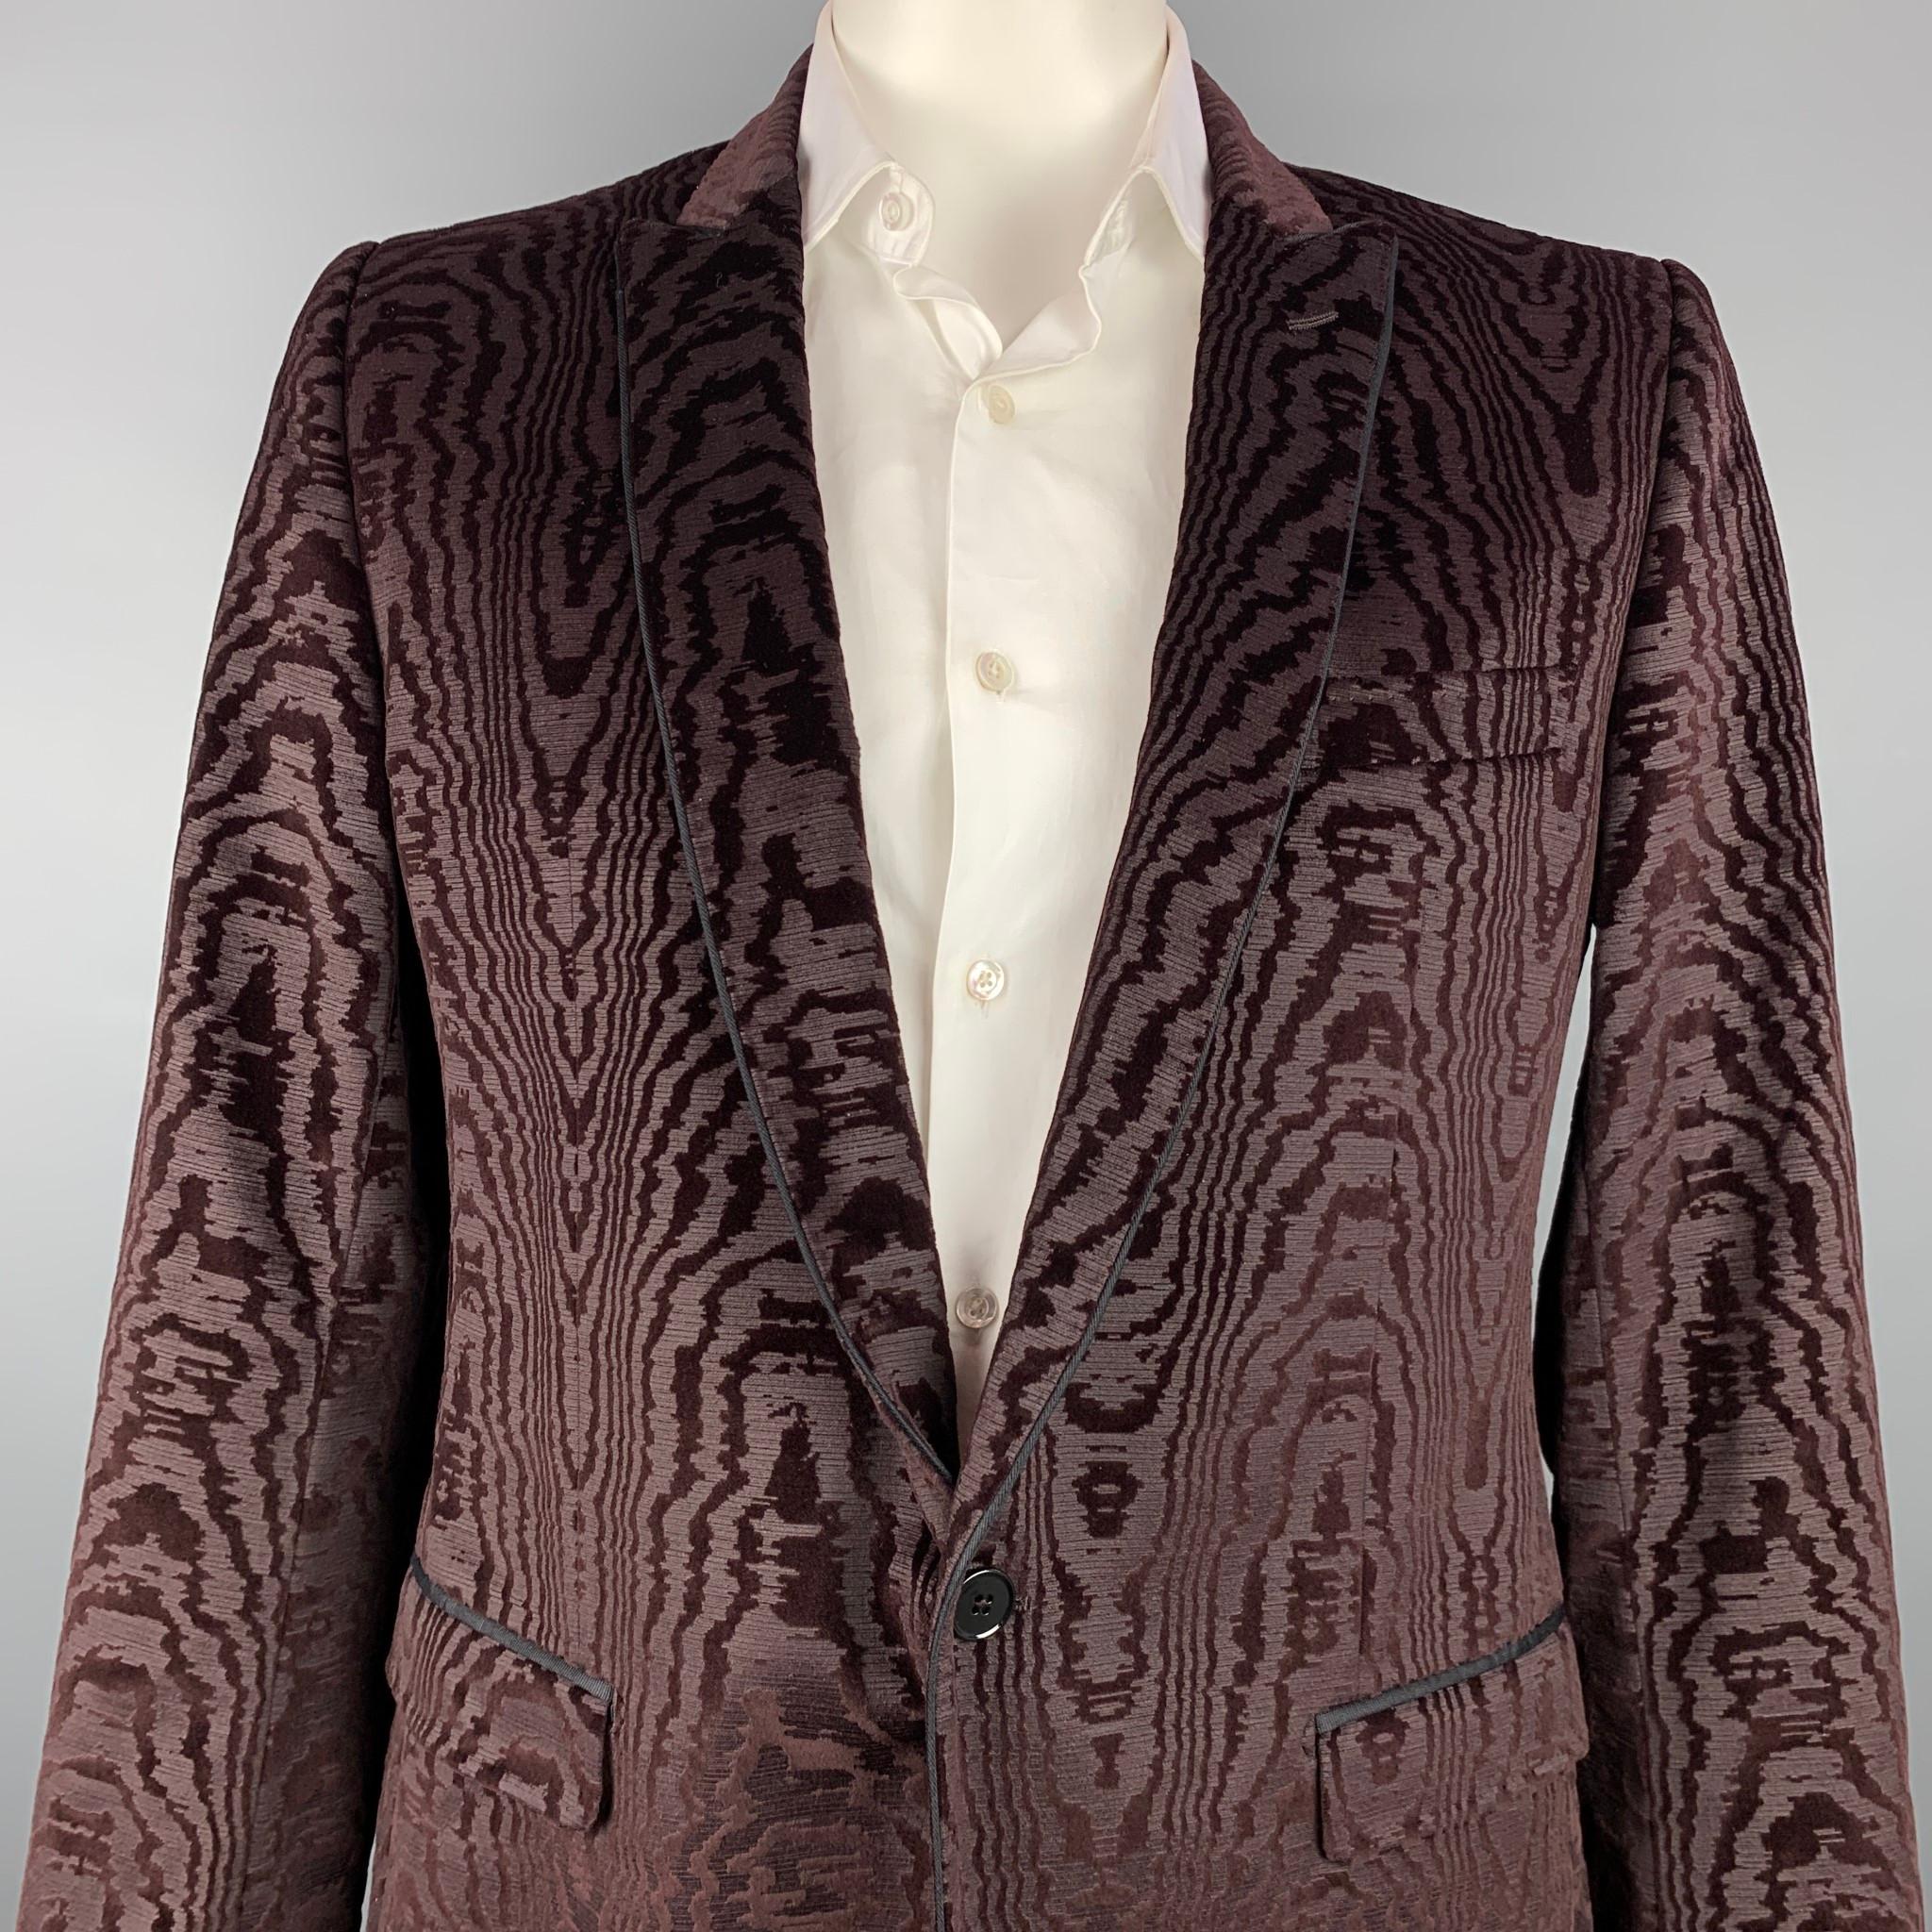 DOLCE & GABBANA sport coat comes in a burgundy jacquard cotton / silk with a full liner featuring a peak lapel, flap pockets, and a single button closure. Made in Italy.

Very Good Pre-Owned Condition.
Marked: IT 54

Measurements:

Shoulder: 18